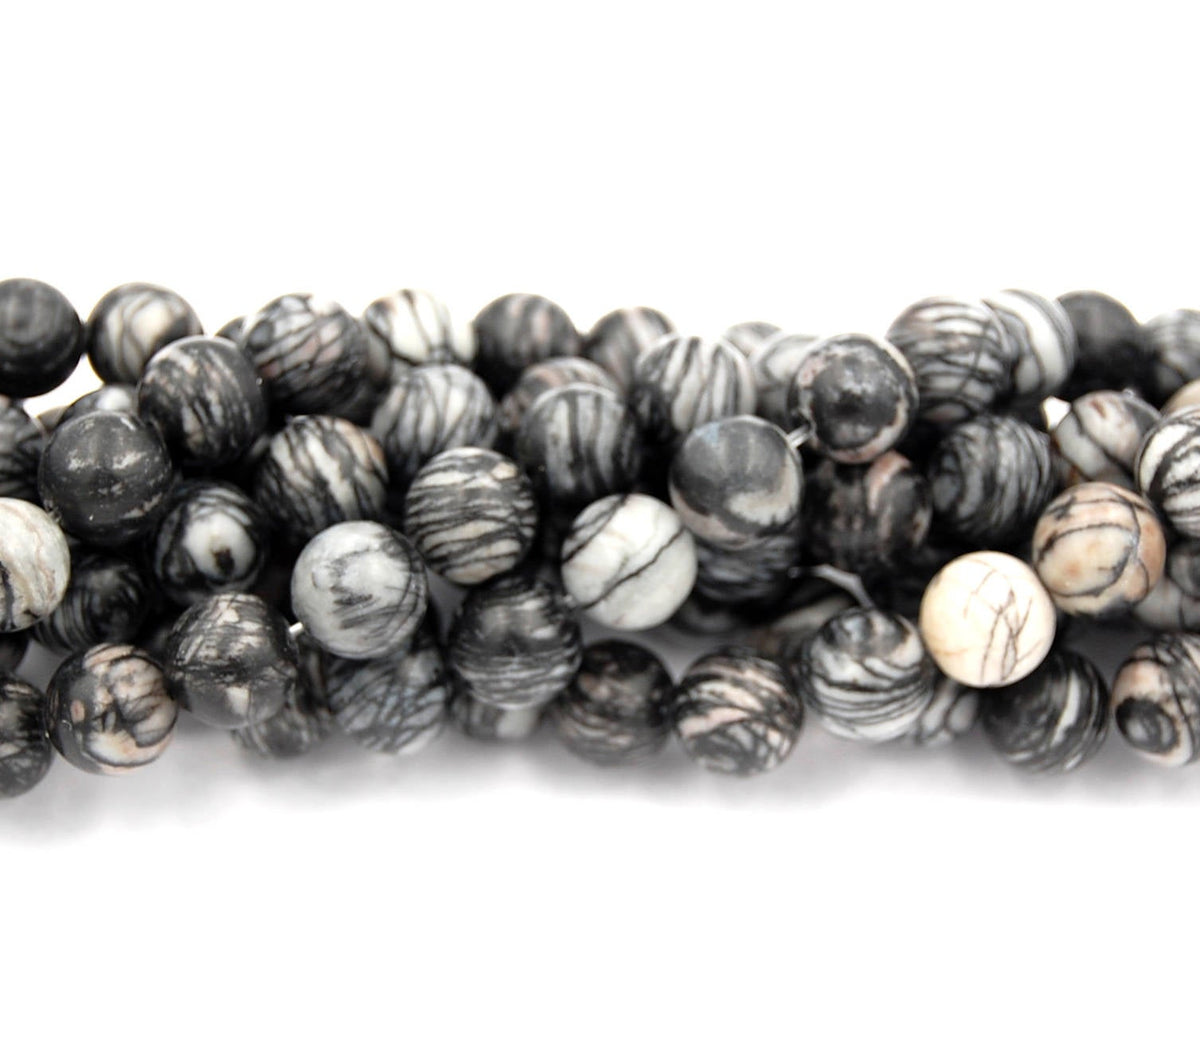 Black Silk Stone 4mm, 6mm, 8mm, 10mm, 12mm in Black and Gray -15.5 inch strand